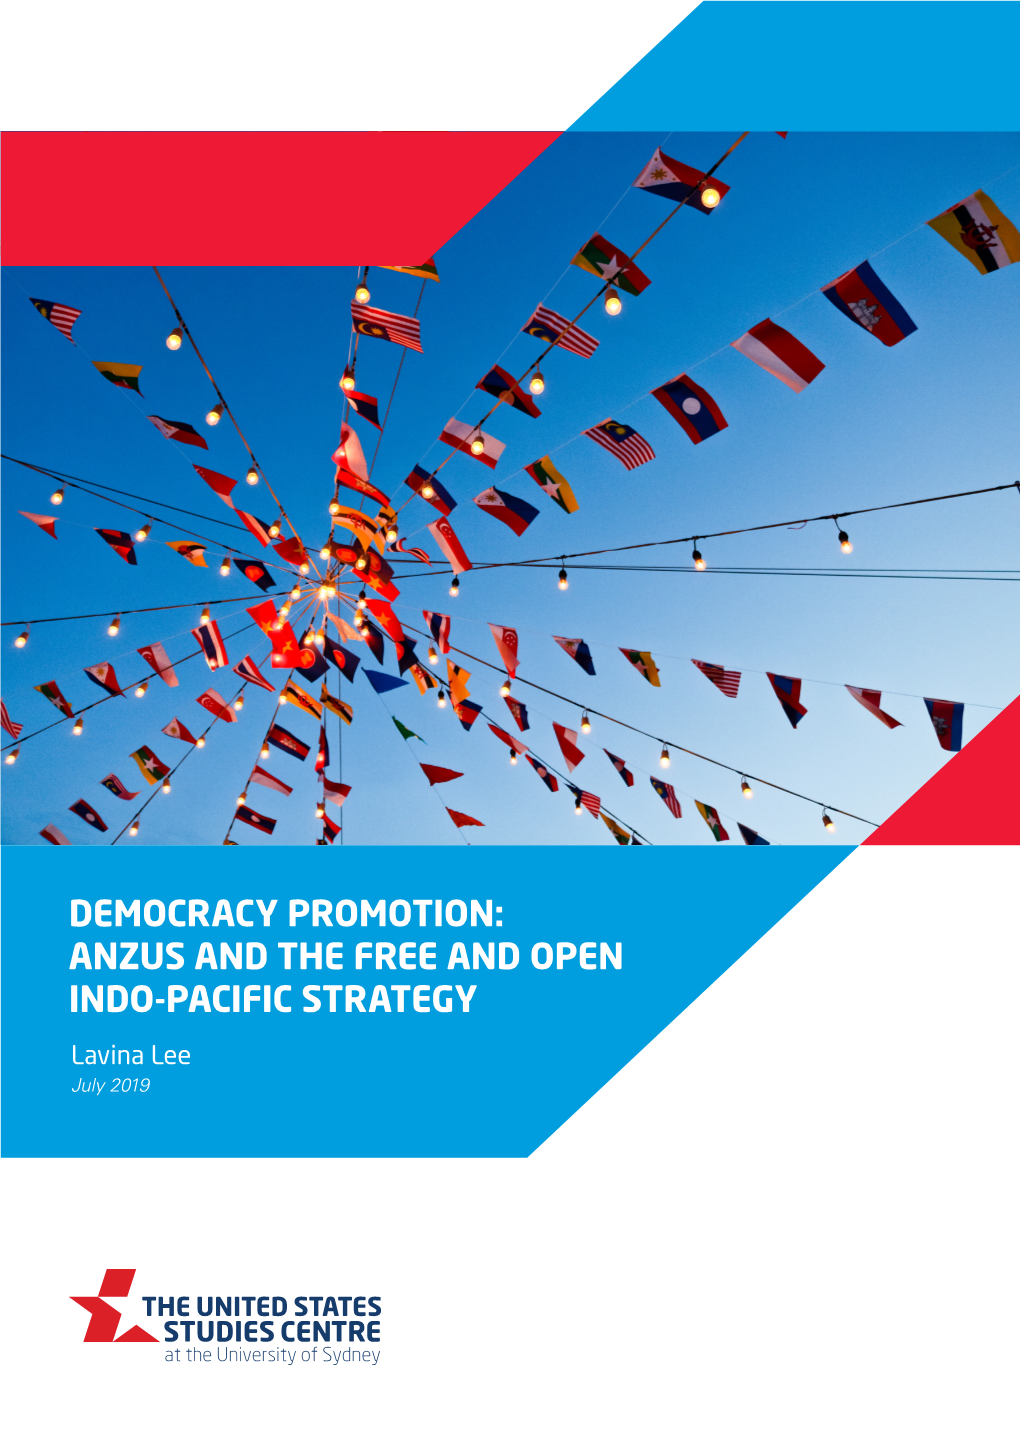 Democracy Promotion: Anzus and the Free and Open Indo